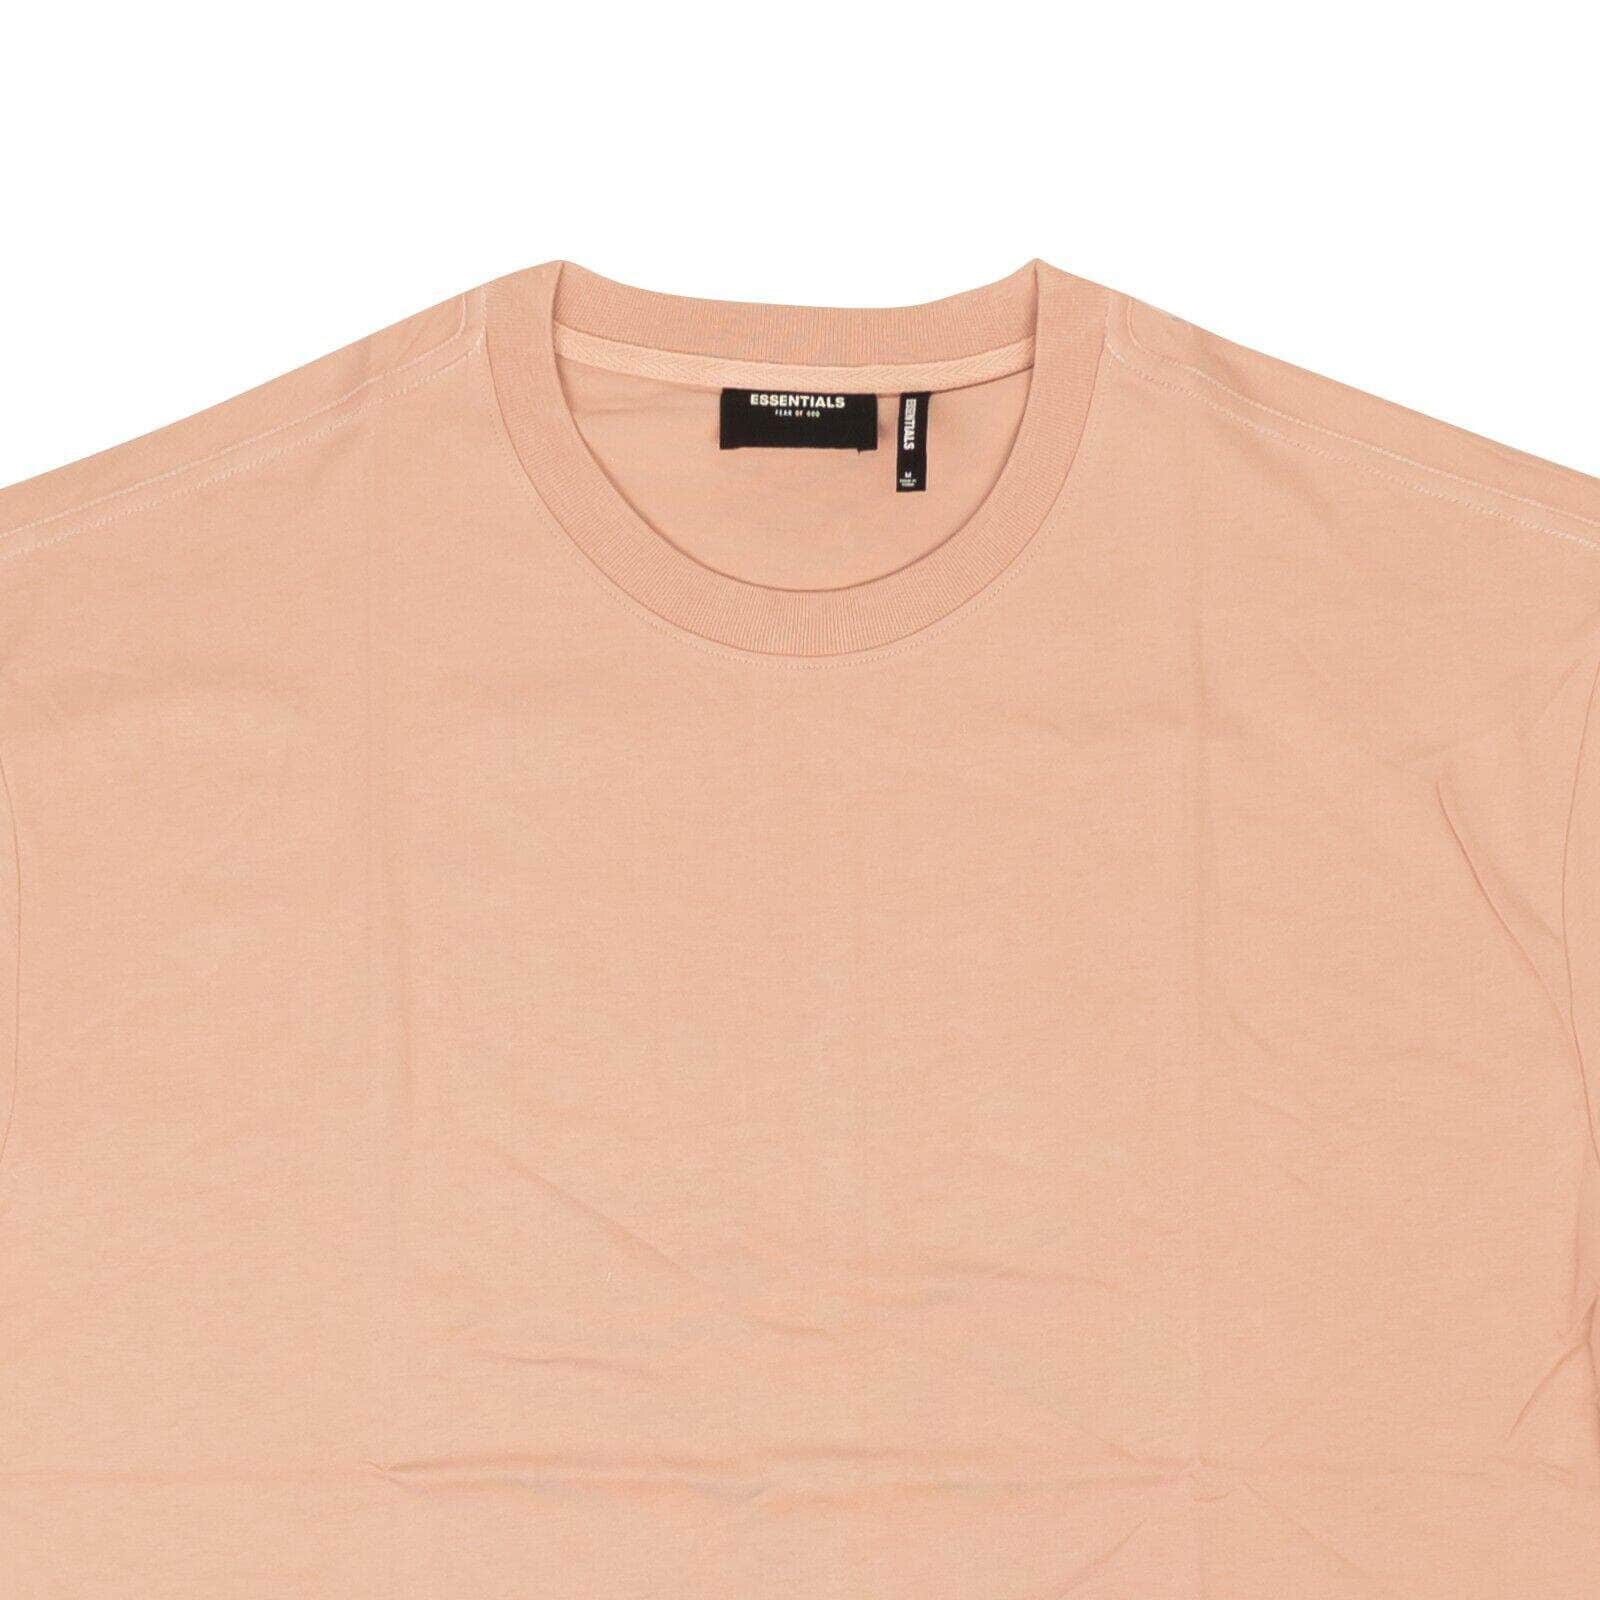 Fear Of God channelenable-all, chicmi, couponcollection, fear-of-god, gender-mens, main-clothing, mens-shoes, size-l, size-m, size-s, size-xl, size-xs, under-250 XL Pink Reflective Short Sleeve T-Shirt 95-EFG-1009/XL 95-EFG-1009/XL